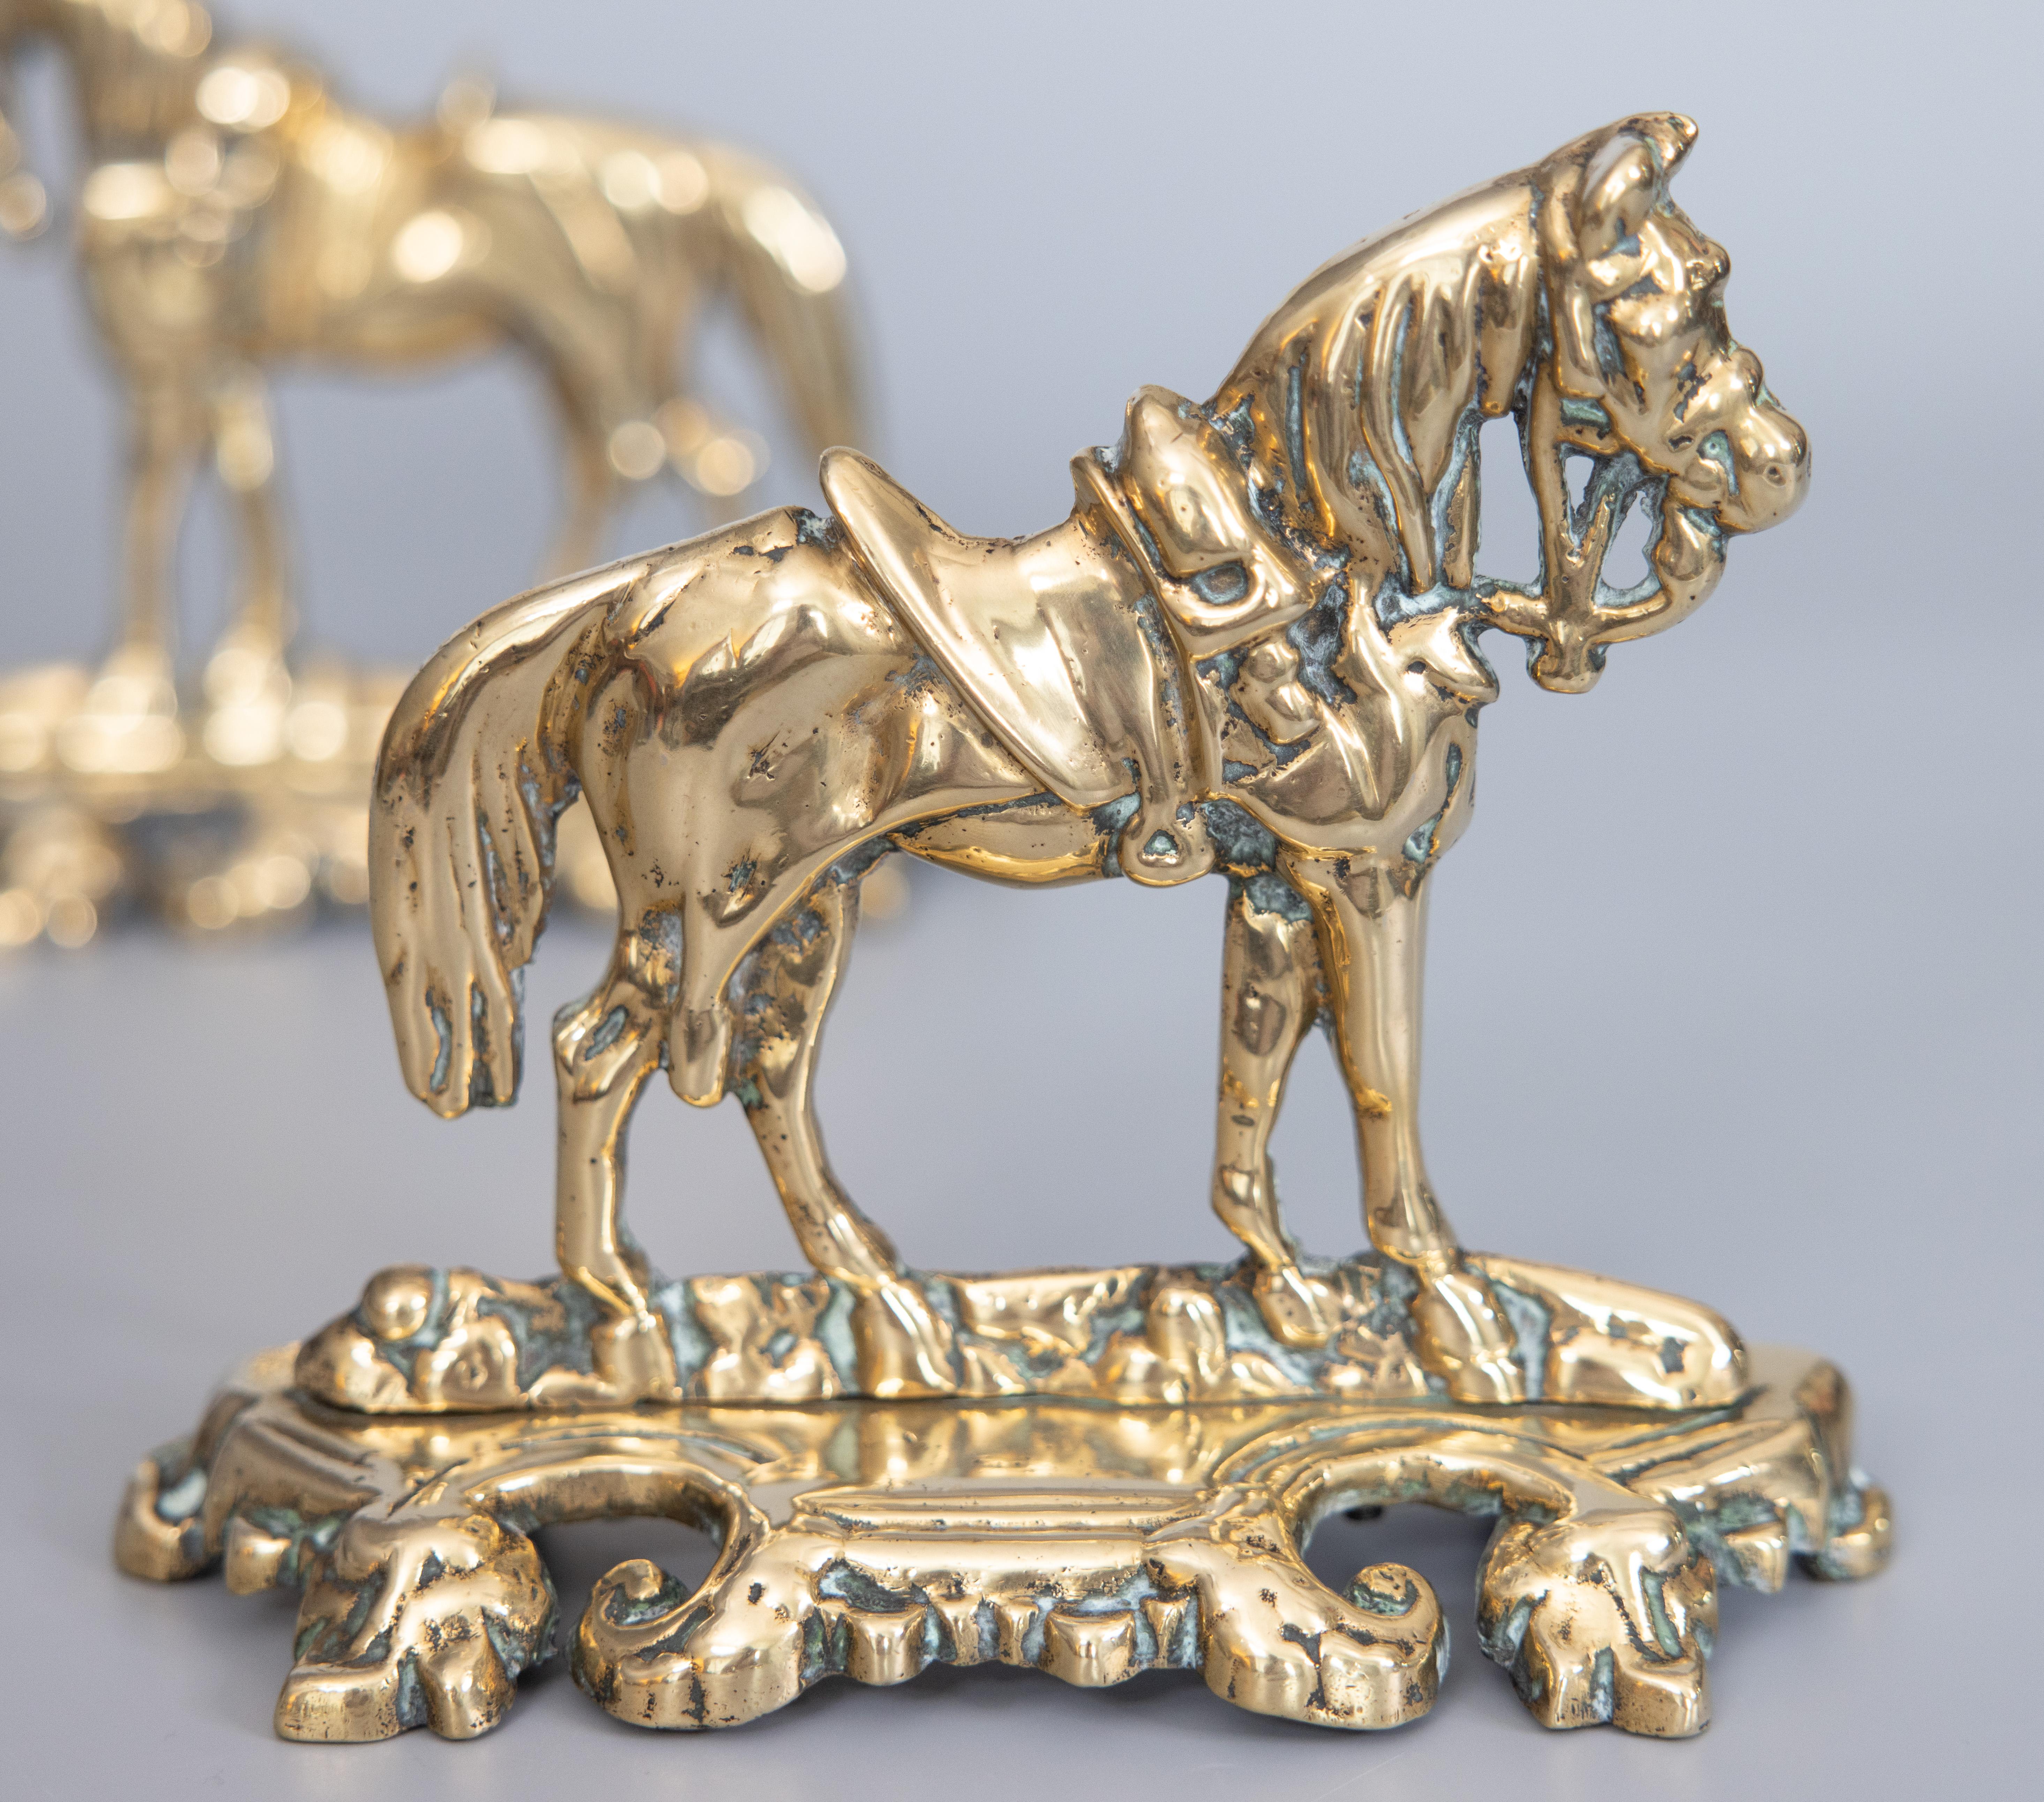 A super pair of 19th-Century English cast brass mantel horses on decorative bases, circa 1870. These handsome horses are large, well made and heavy weighing over 6 lbs, with fine details. They would be perfect on a fireplace mantel, displayed on a